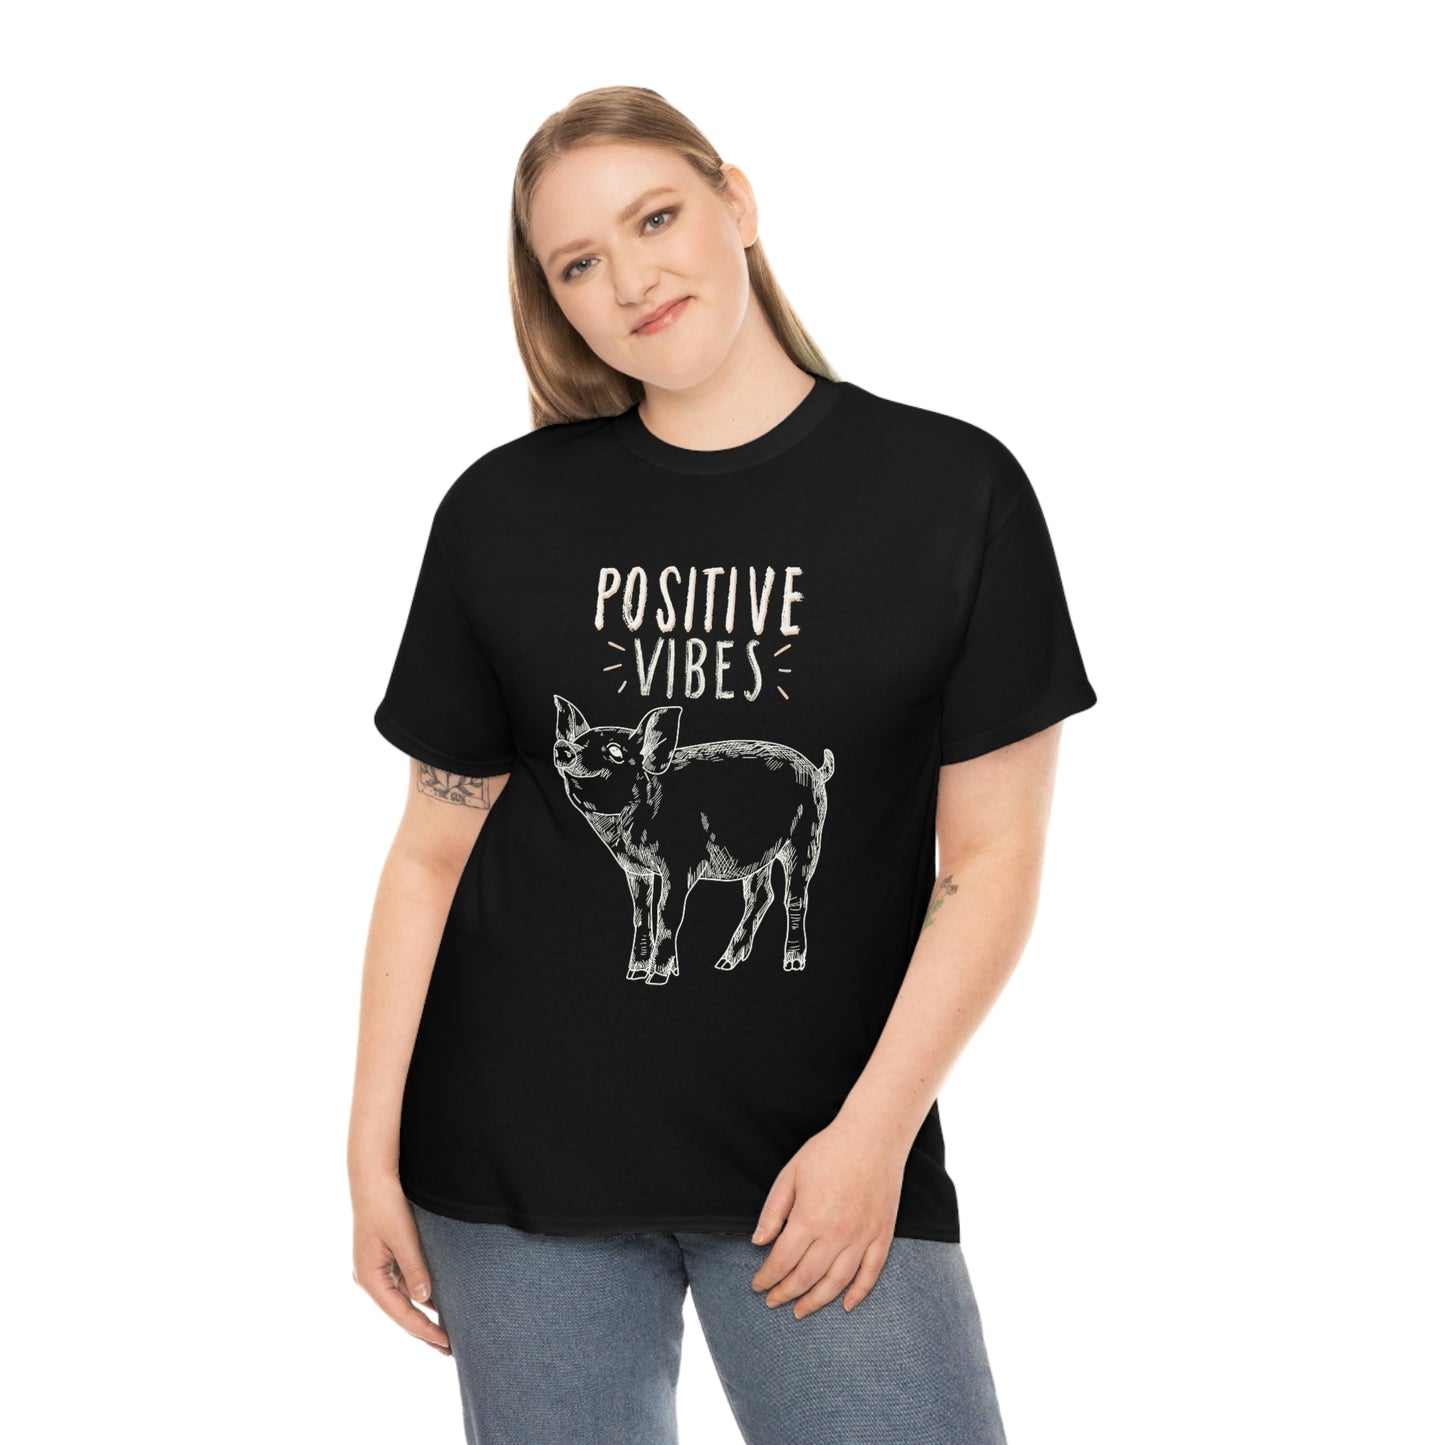 "Positive Vibes" Cute Pig Graphic tee shirt